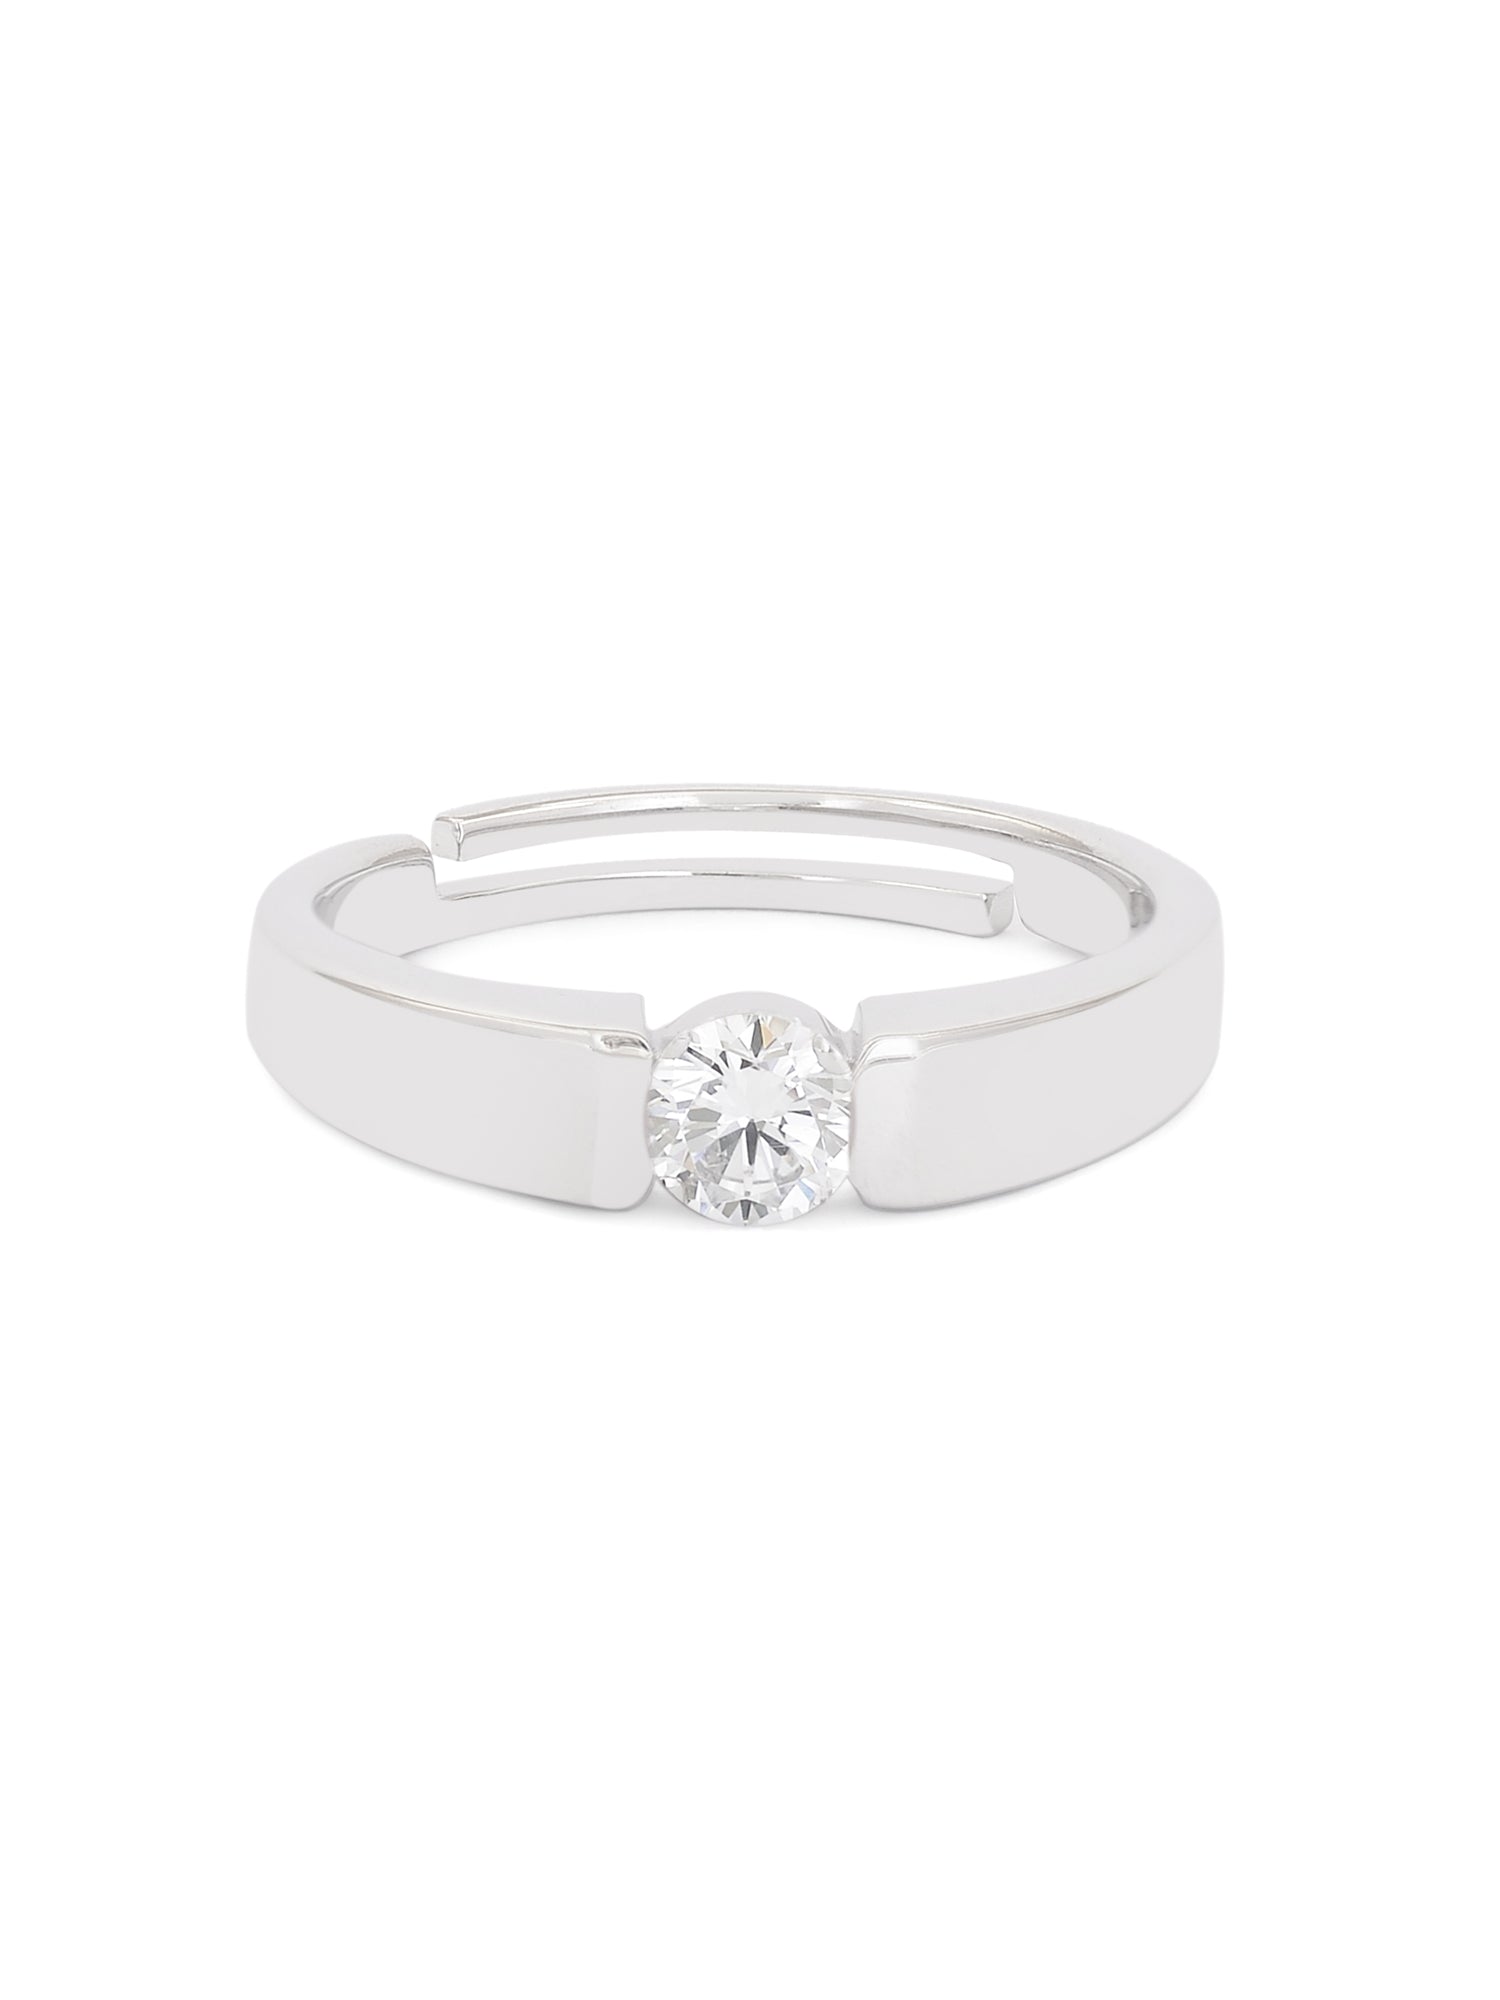 SILVER ADJUSTABLE SOLITAIRE RING FOR HIM-3